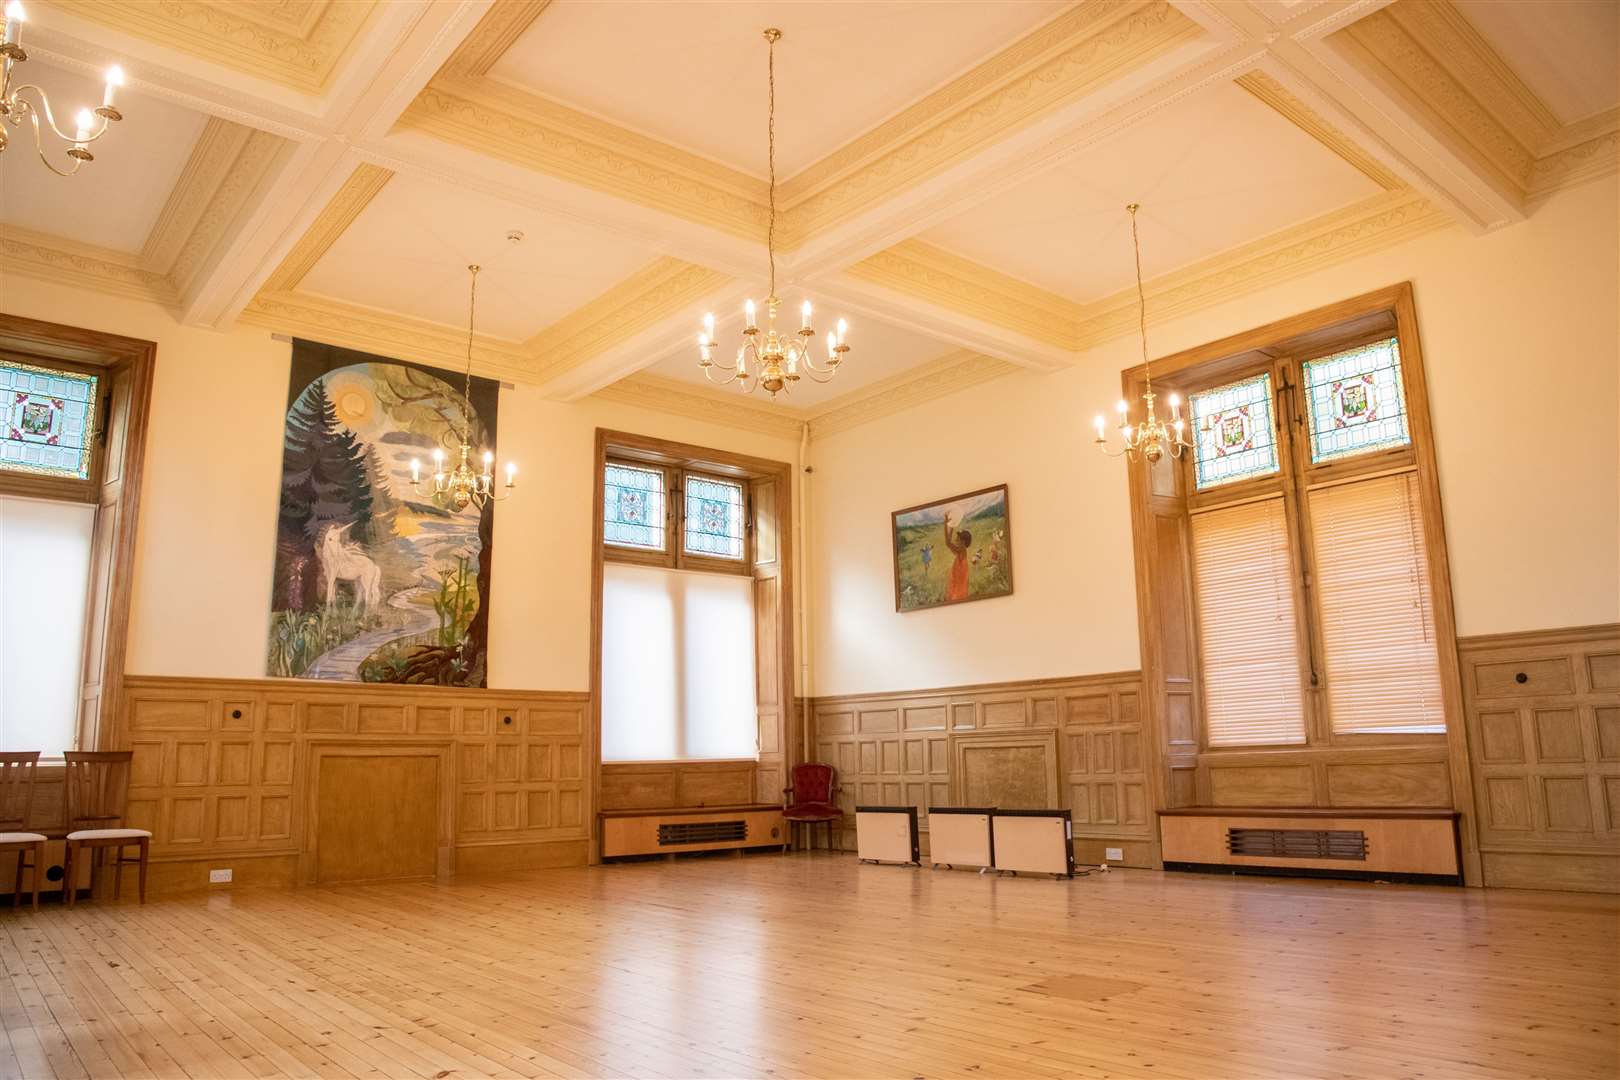 The immaculate ballroom still has its original wooden wall panelling and flooring.